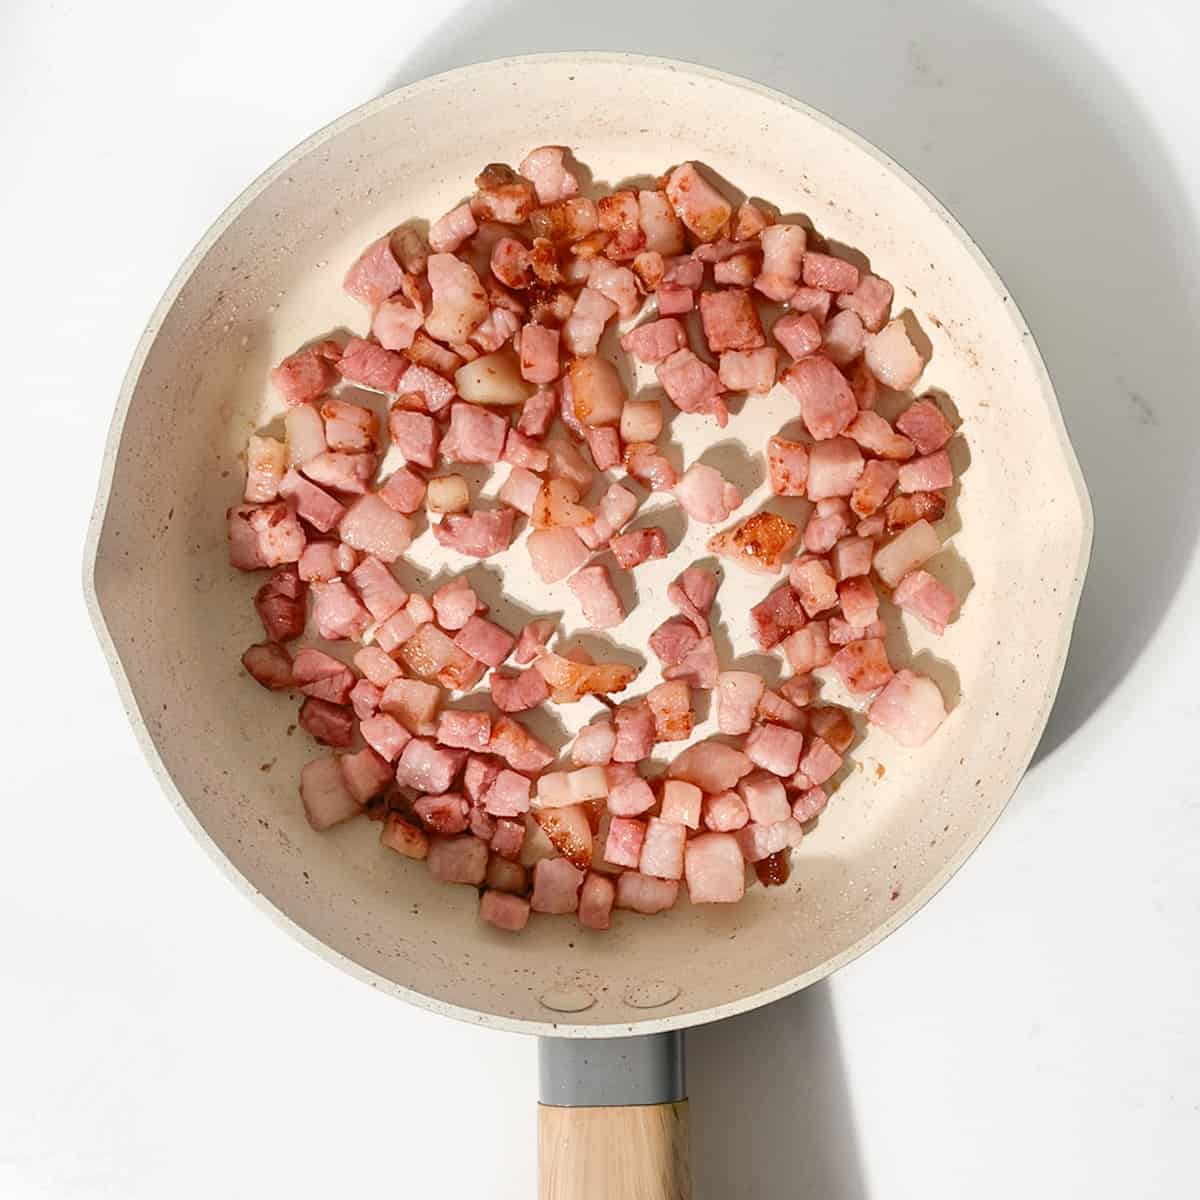 Frying pancetta in a small pan.